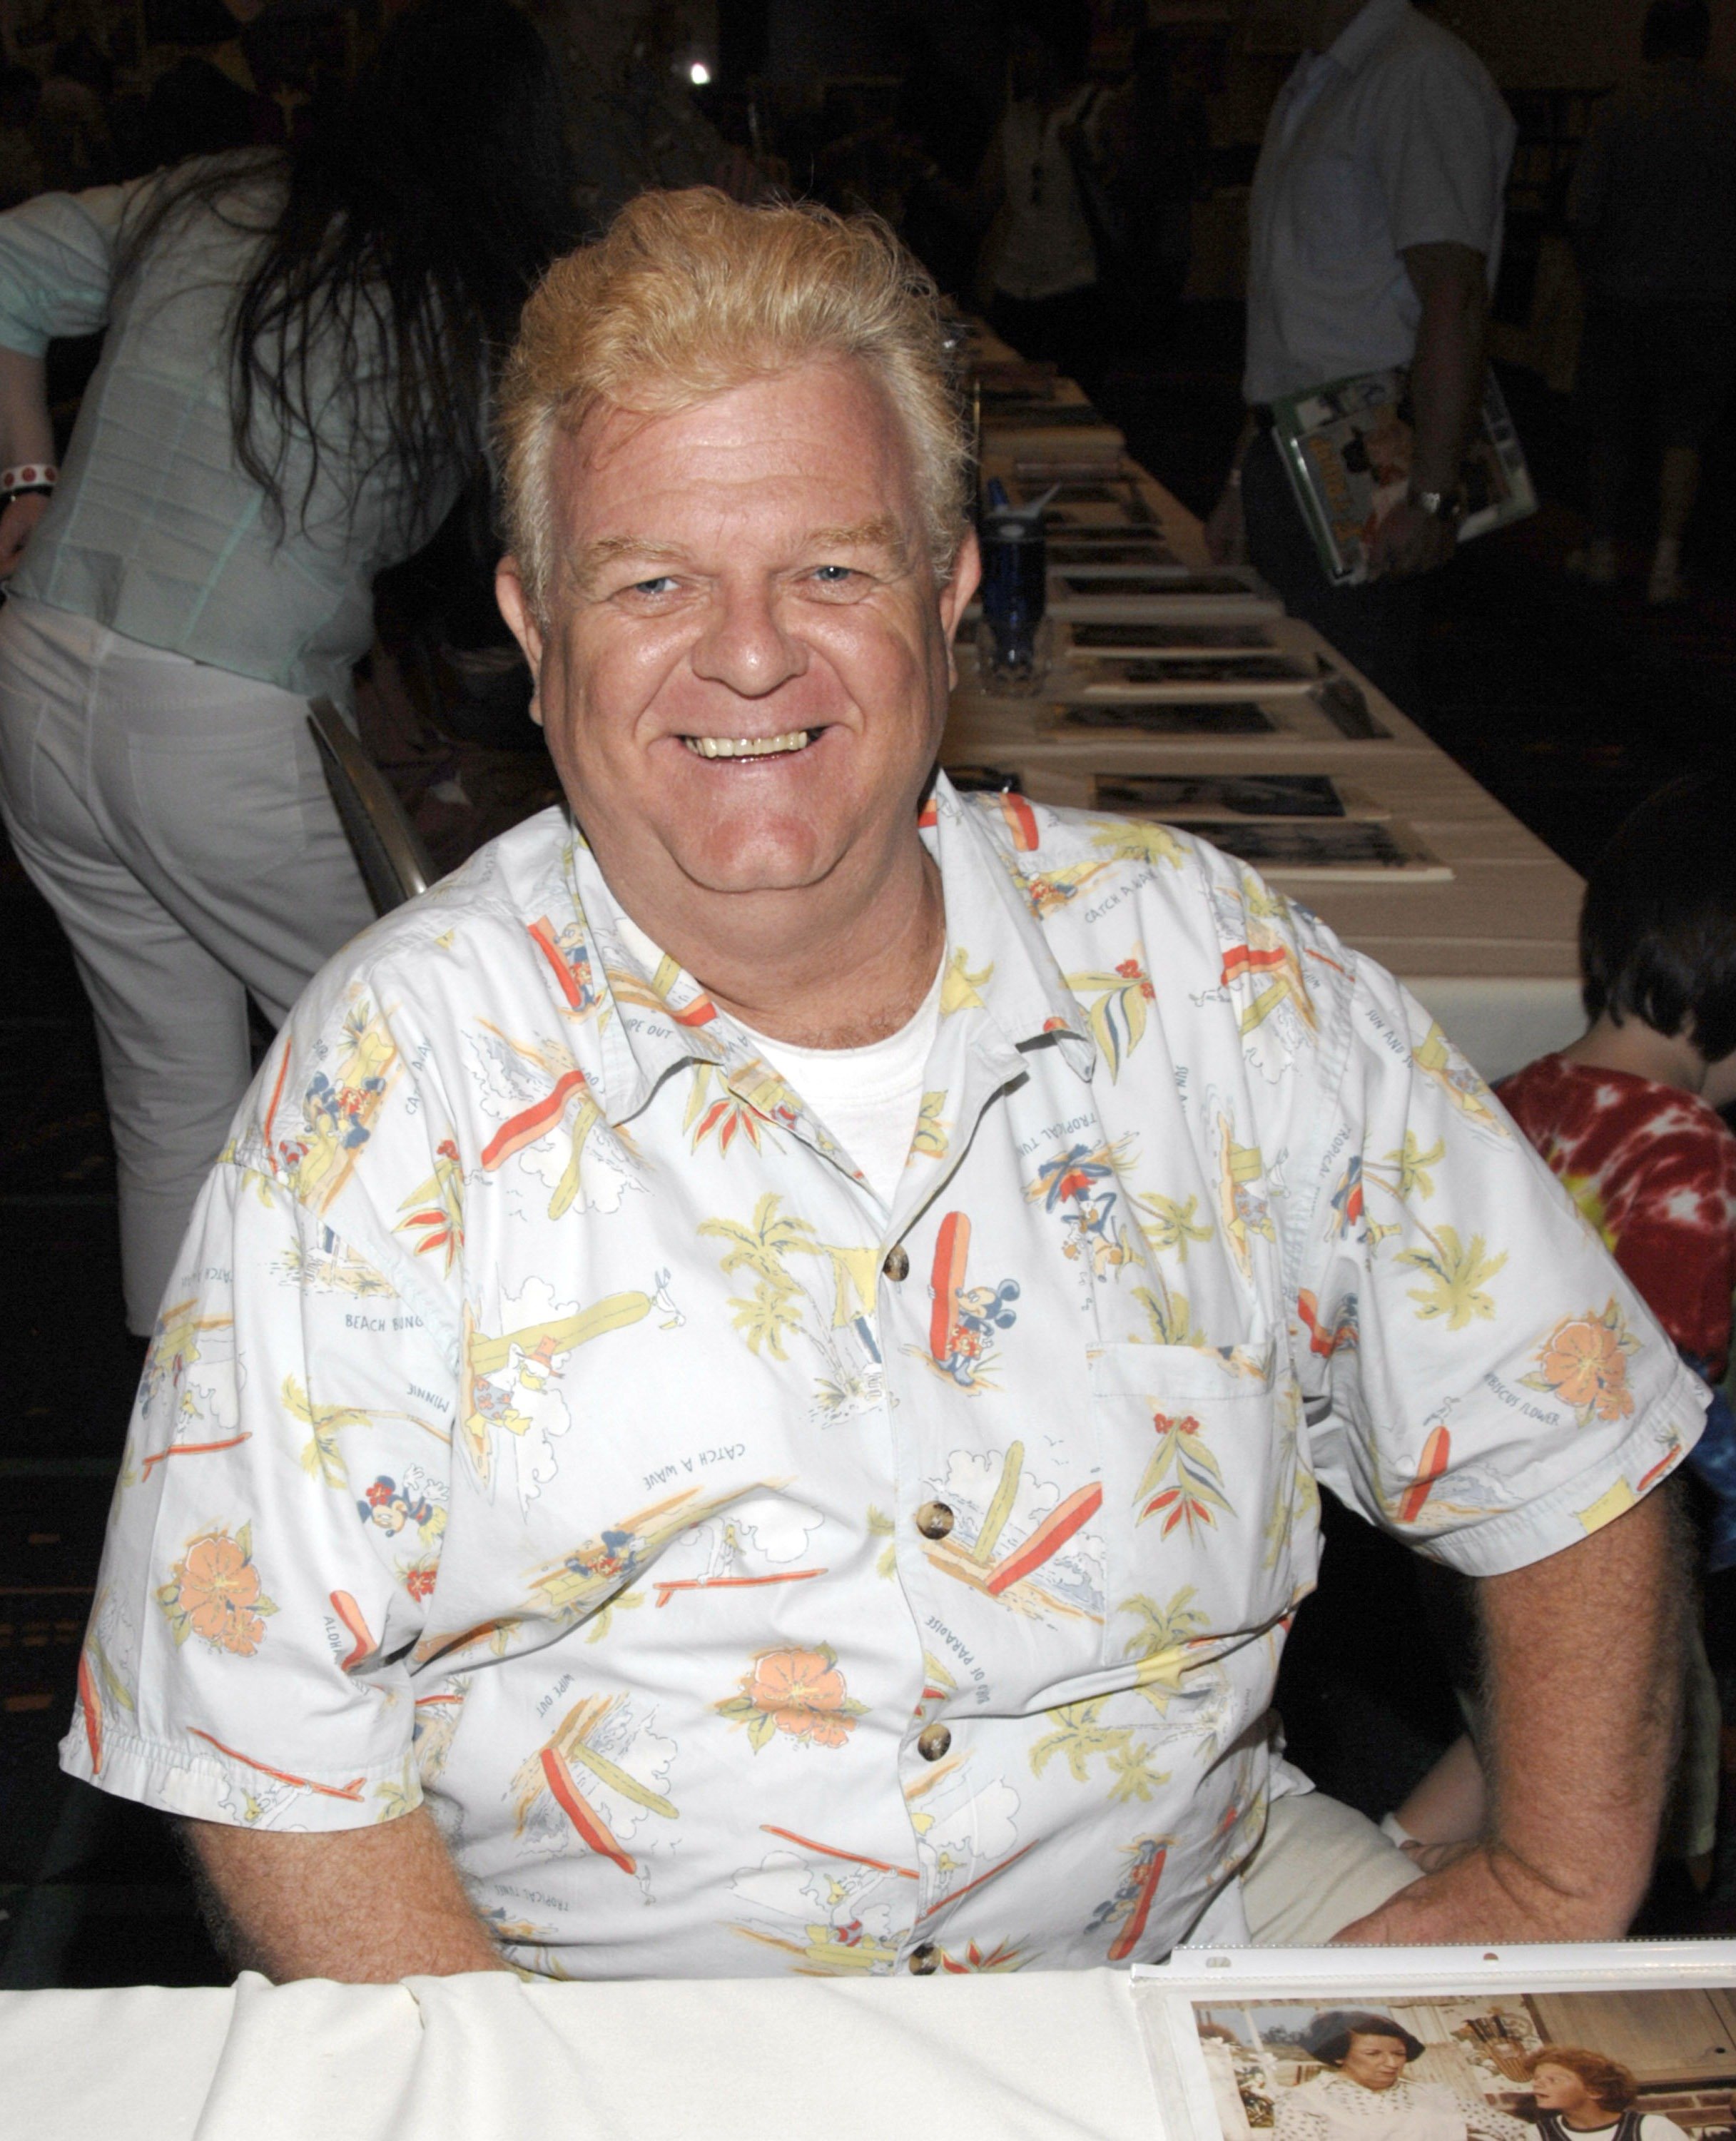 Johnny Whitaker attends the Hollywood Collectors & Celebrities Show on July 20, 2007 | Photo: GettyImages